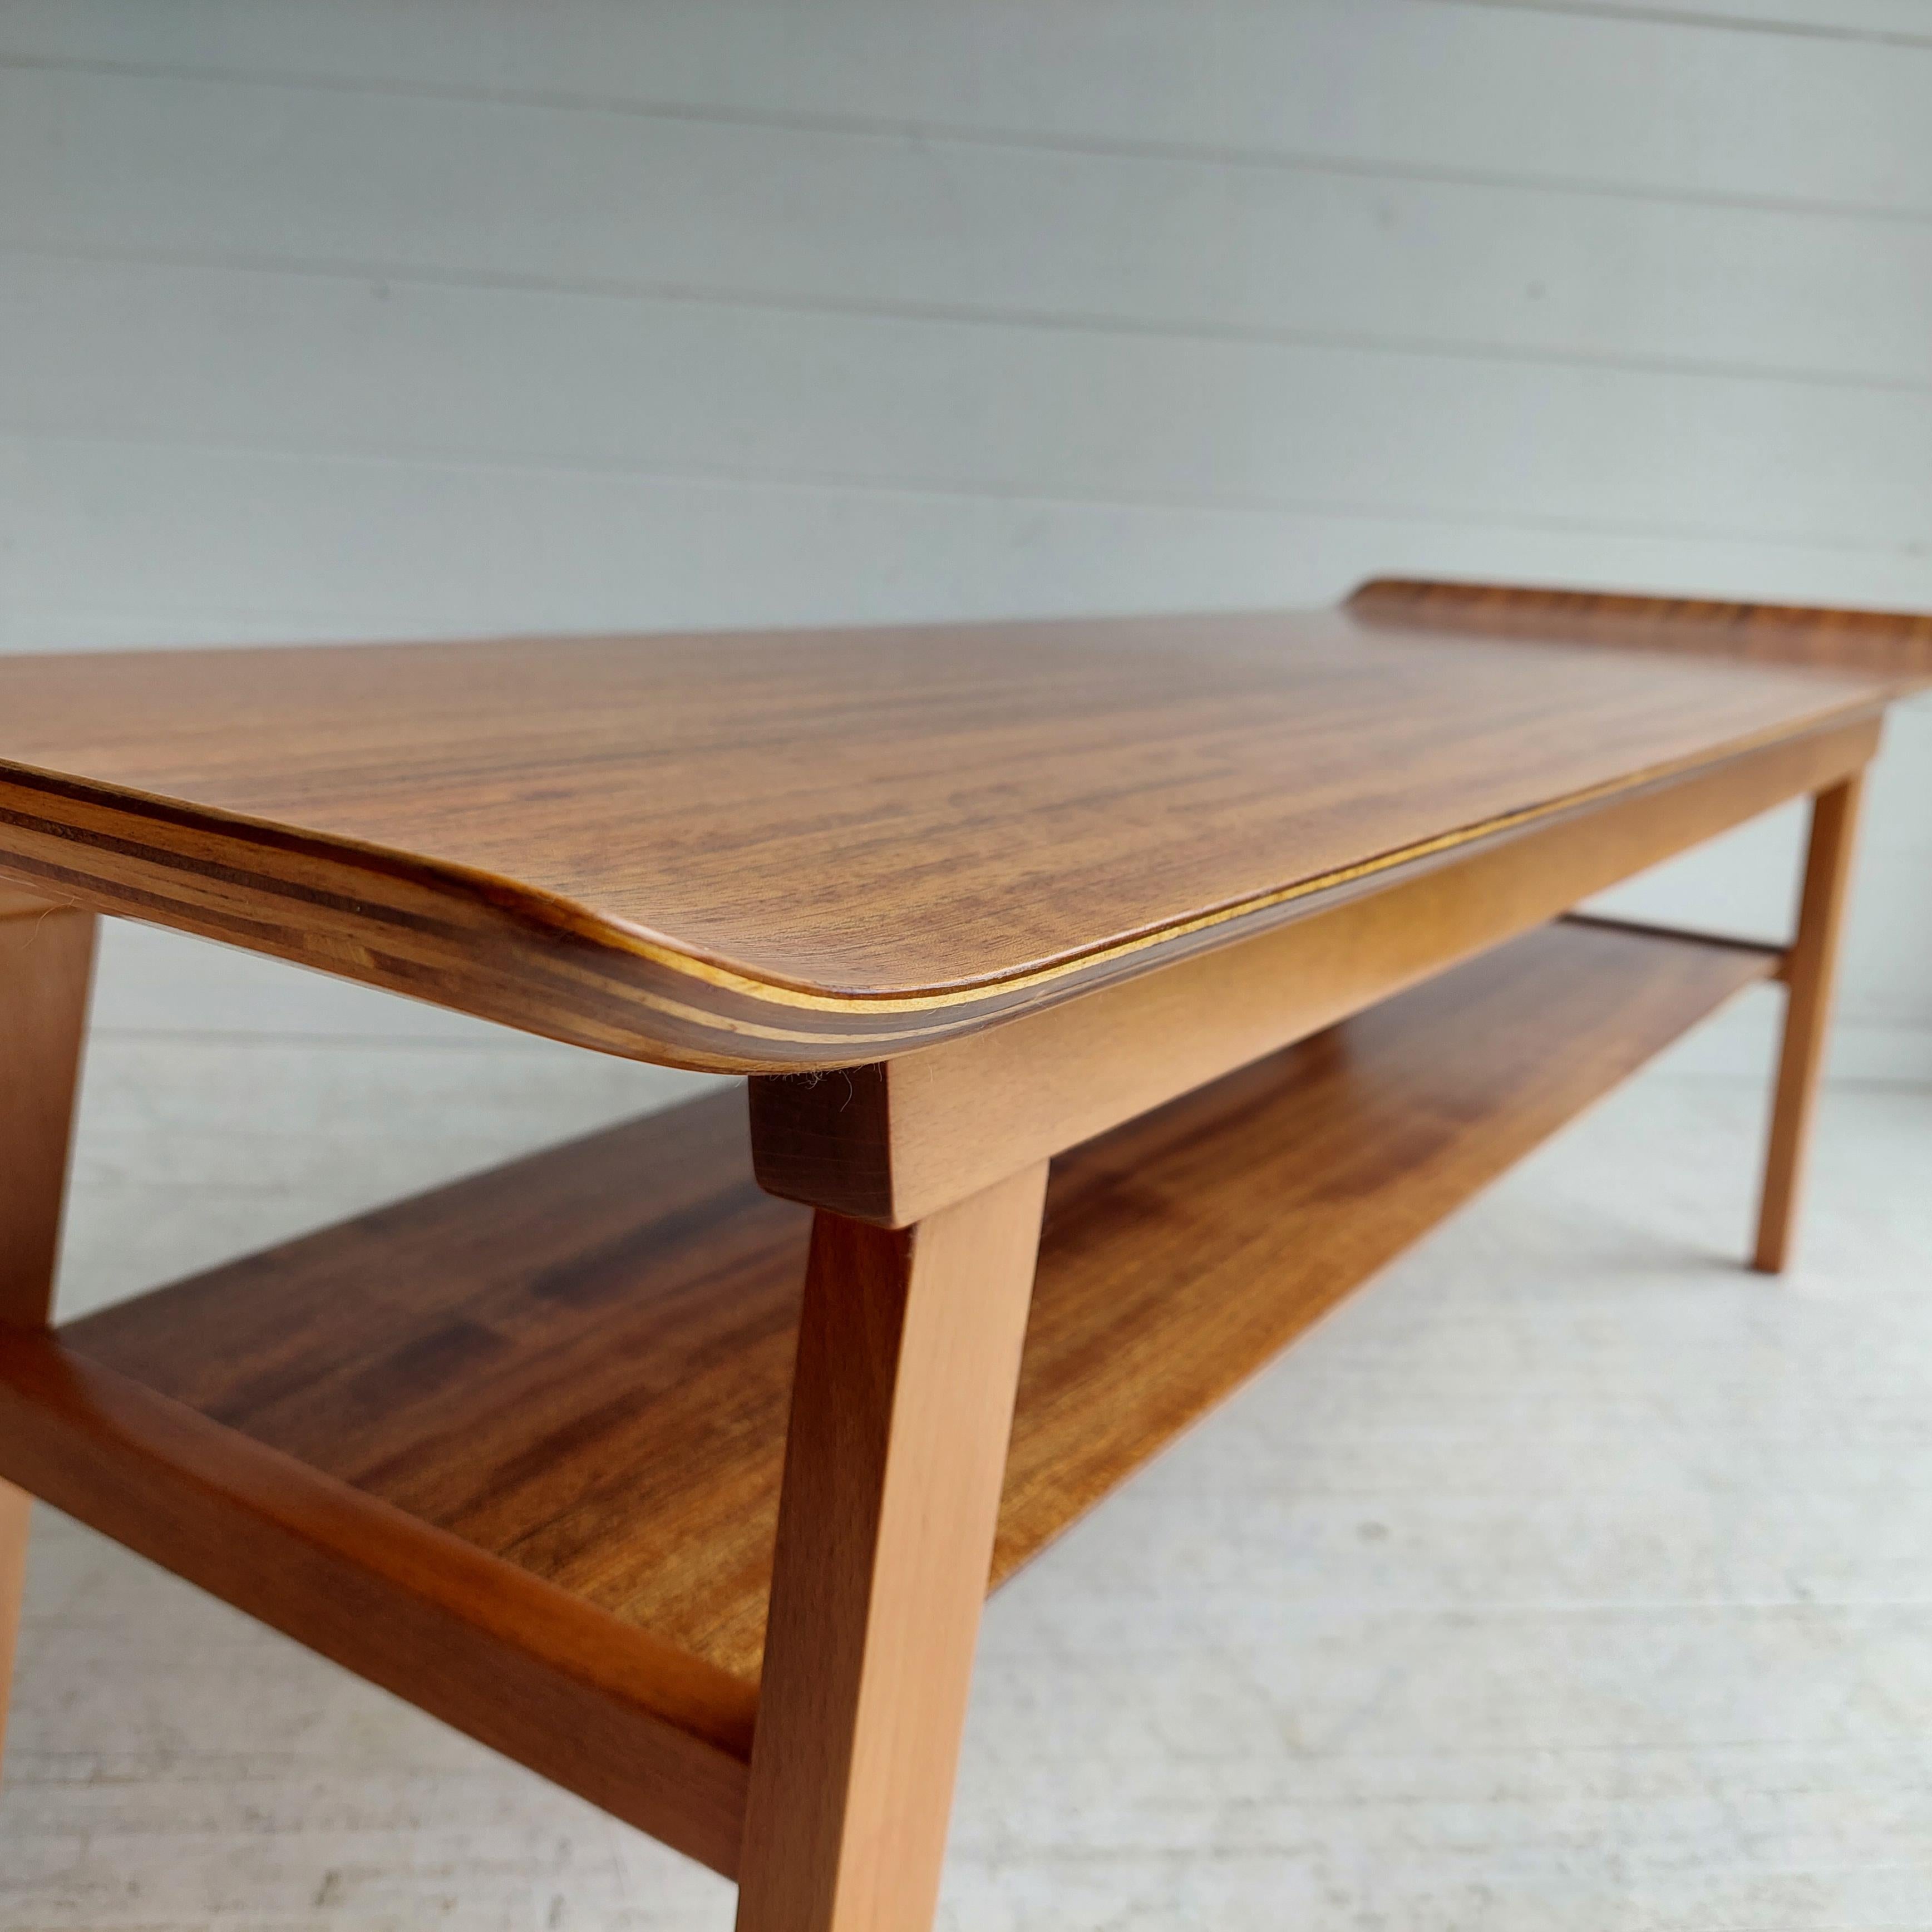 Scandinavian Modern Mid Century Walnut 2 tier coffee table Ewart Myer for Horatio Myer and Co, 1960s